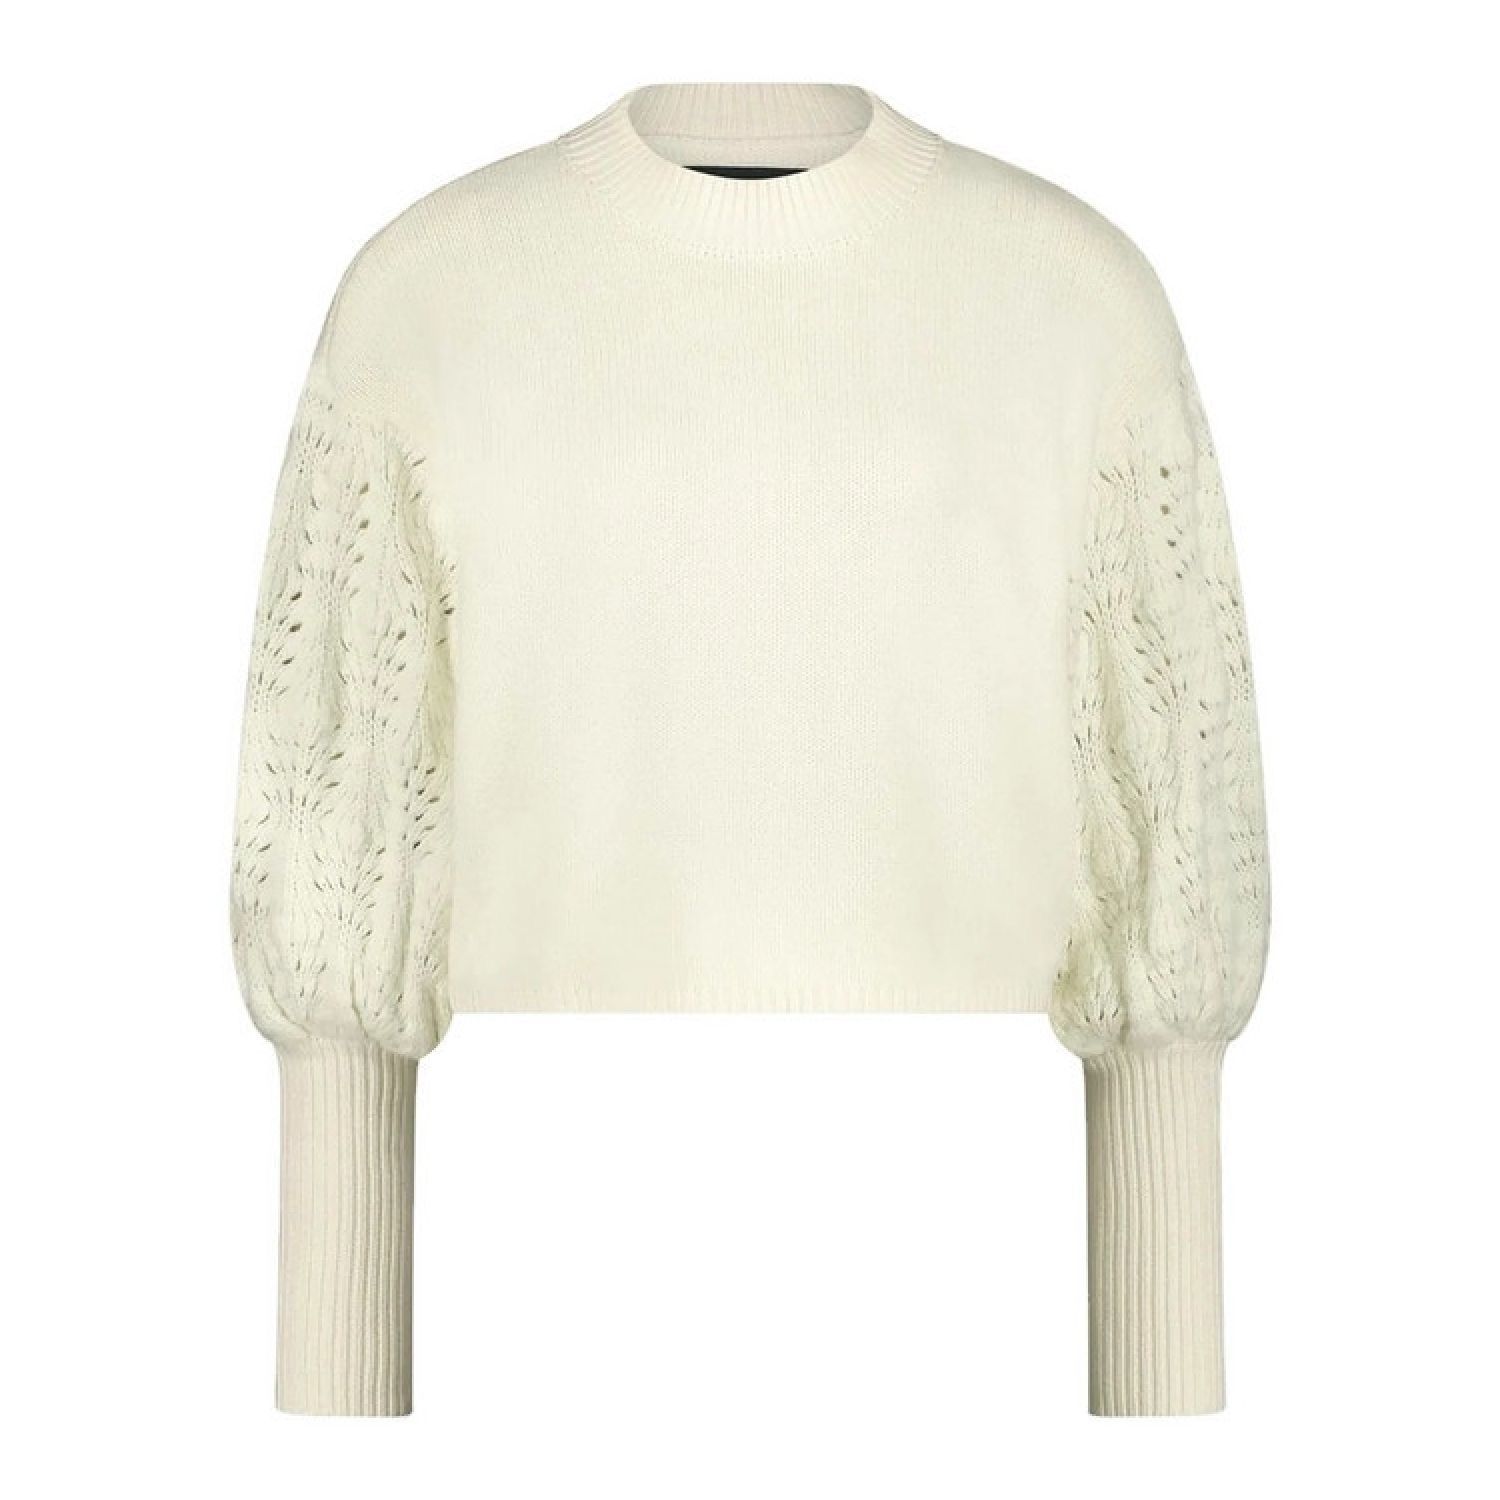 Imani knitted Pull l/s Off-White | Another Label